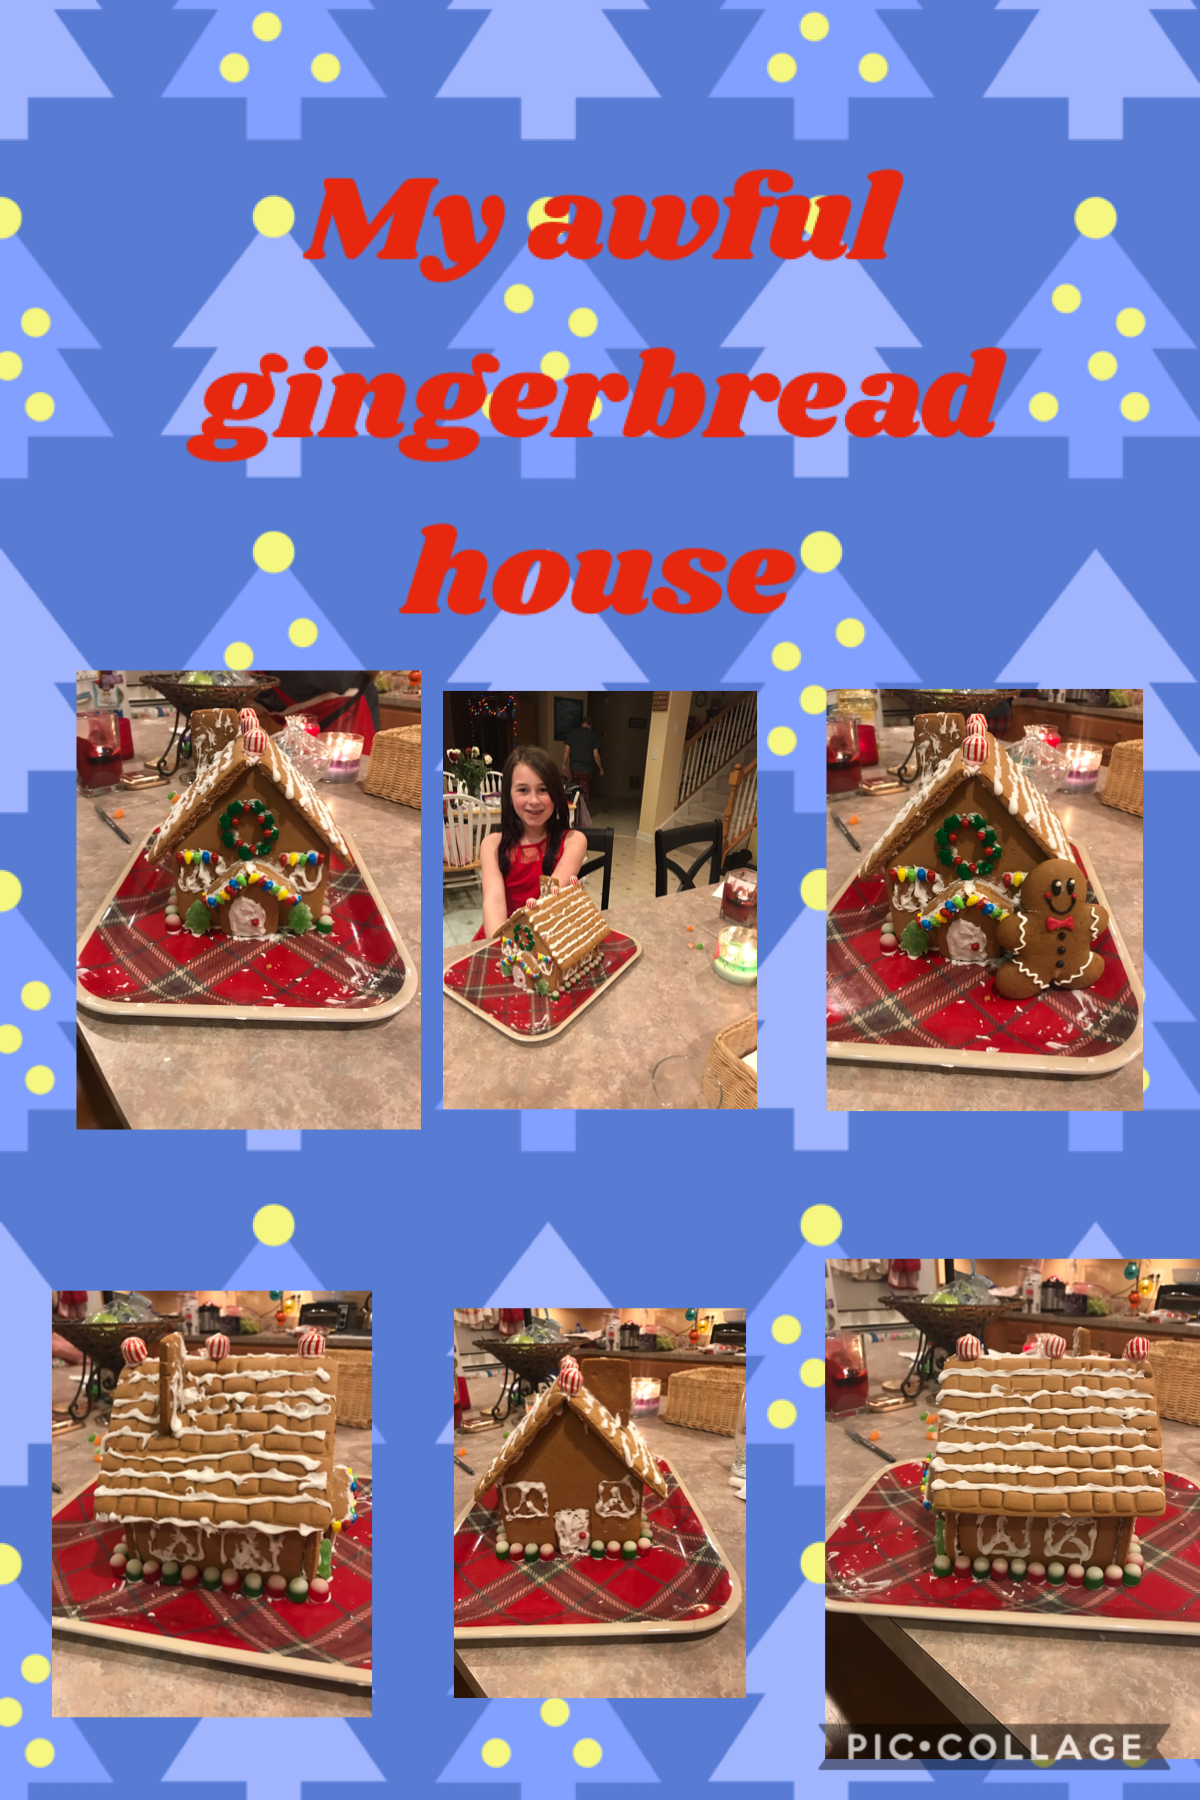 My awful gingerbread house